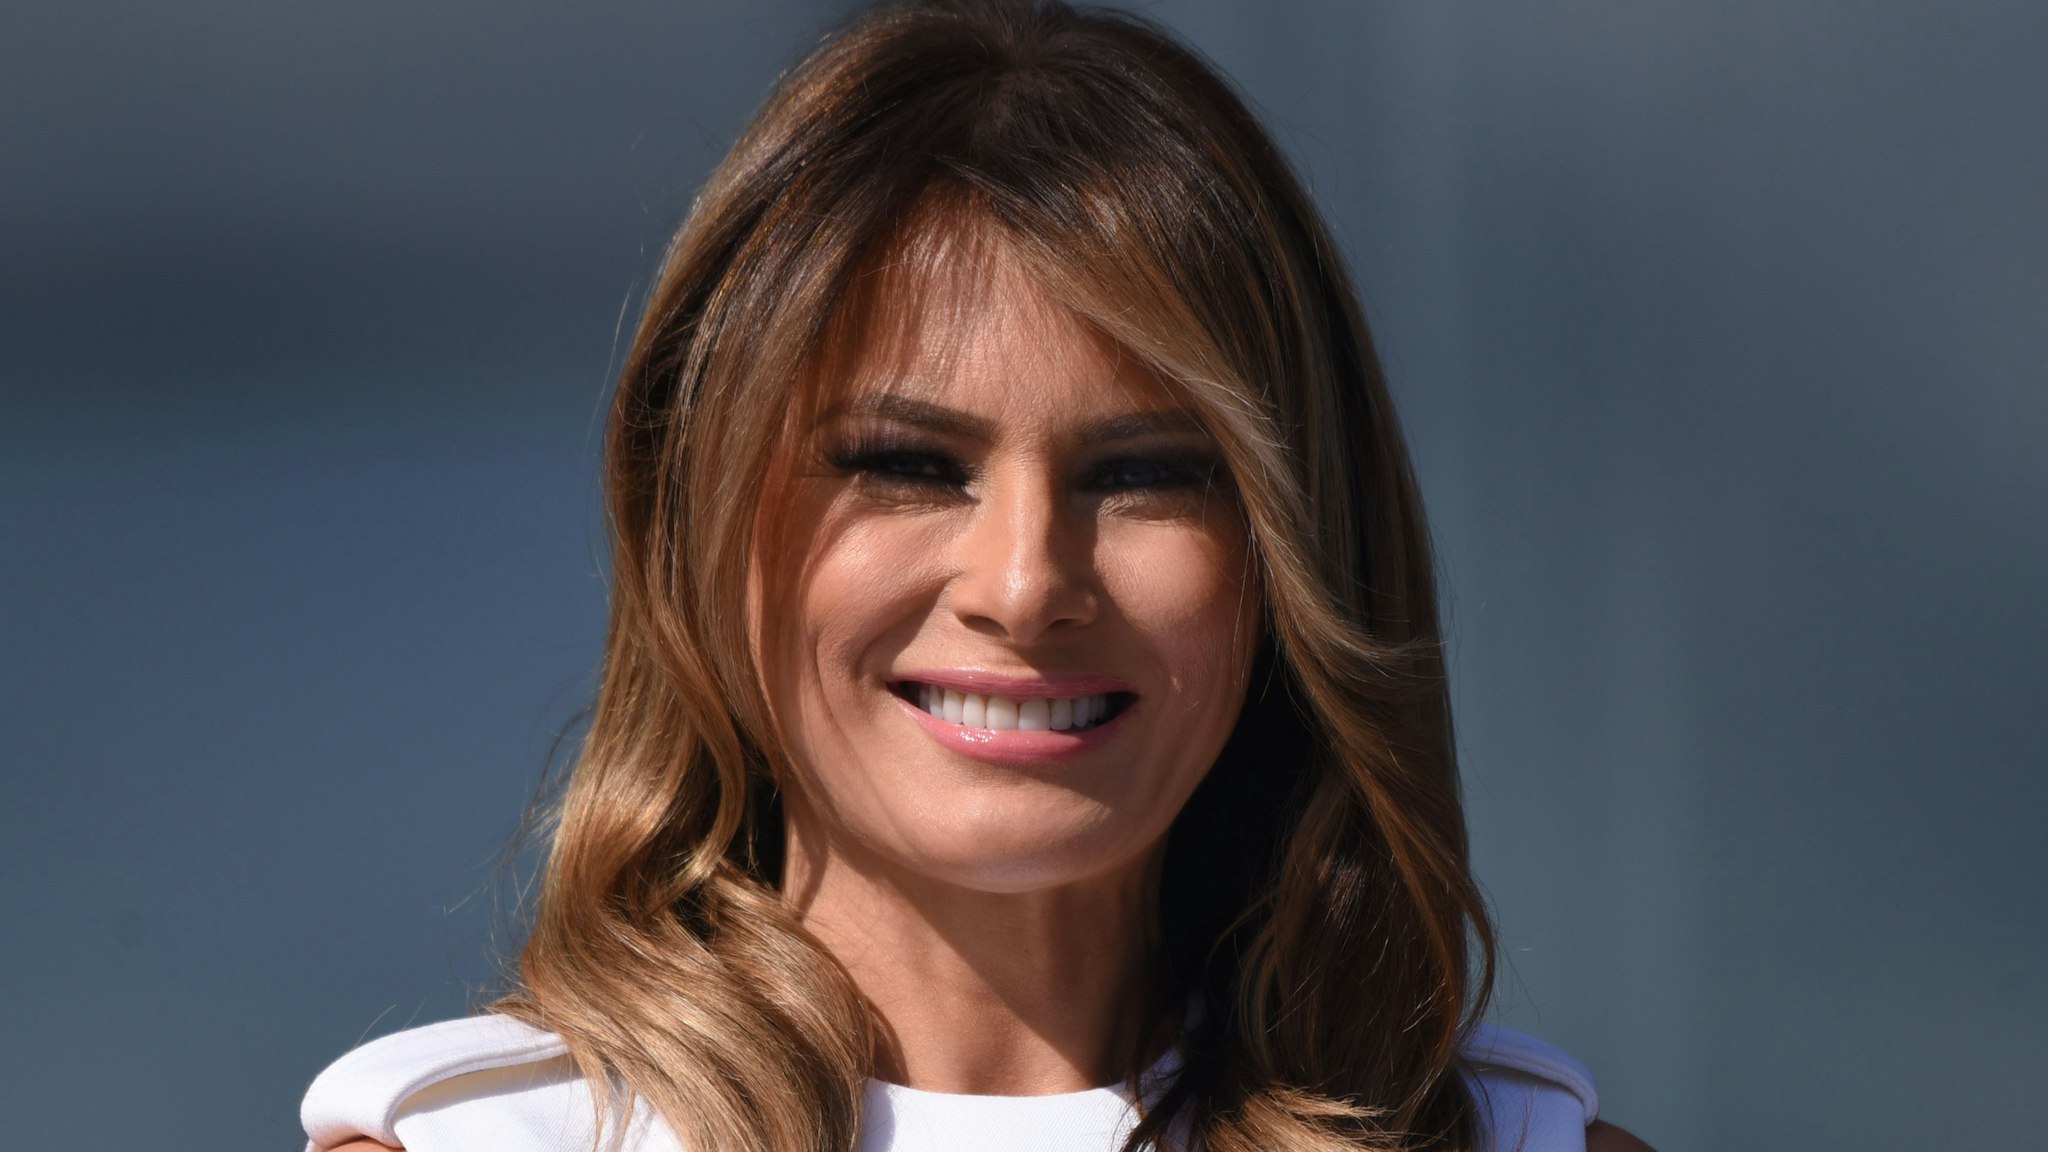 US First Lady Melania Trump looks during the reopening of the Washington Monument on the National Mall on September 19, 2019 in Washington, DC. (Photo by Olivier Douliery / AFP) (Photo credit should read OLIVIER DOULIERY/AFP via Getty Images)